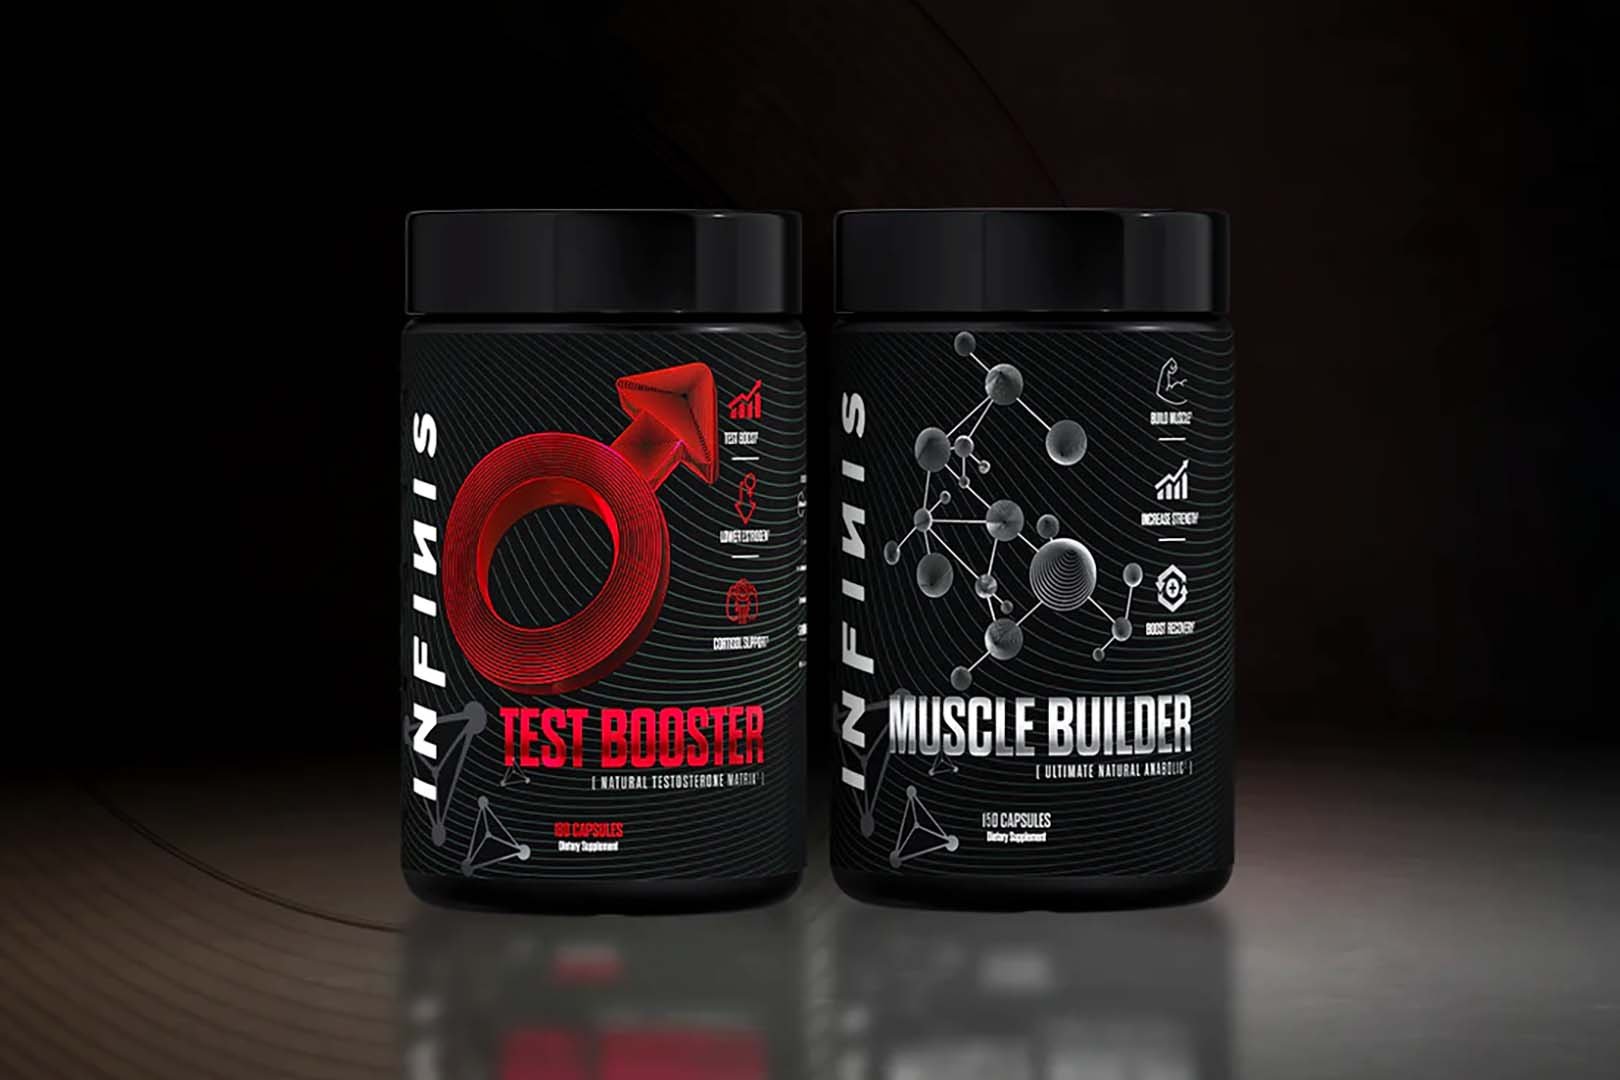 Infinis Launches Test Booster And Muscle Builder